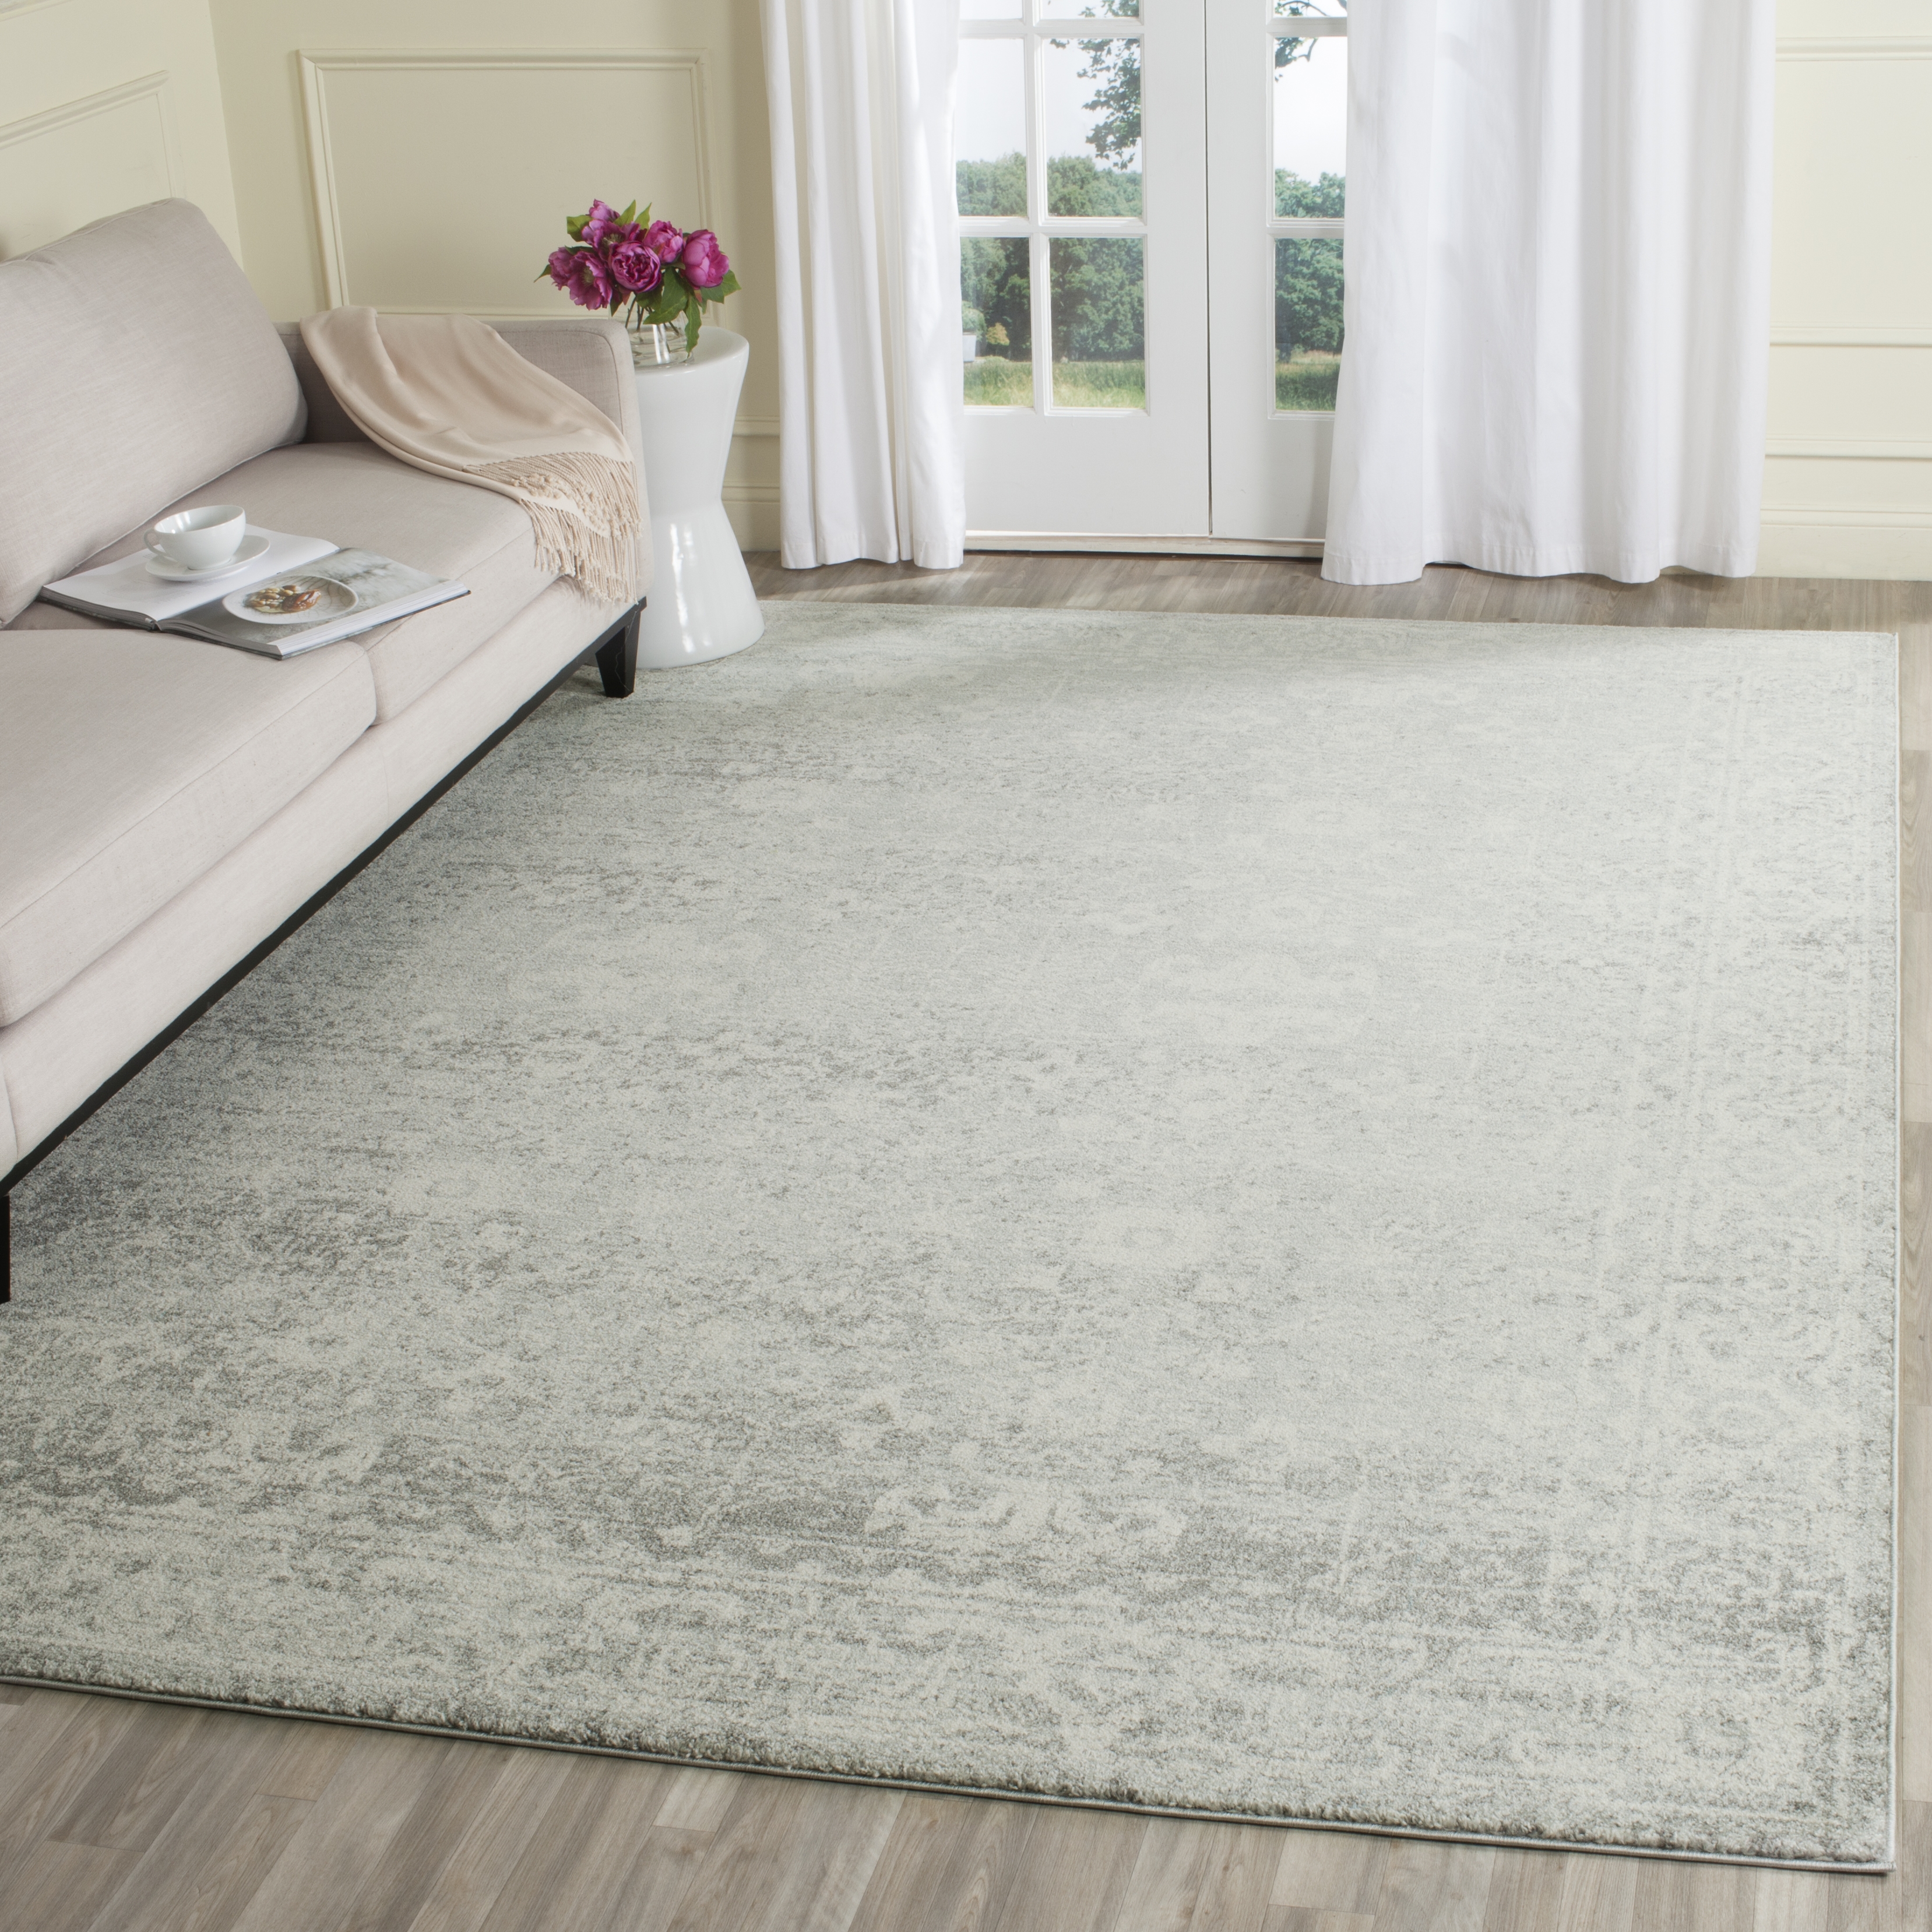 Arlo Home Woven Area Rug, EVK270Z, Silver/Ivory,  9' X 12' - Image 2